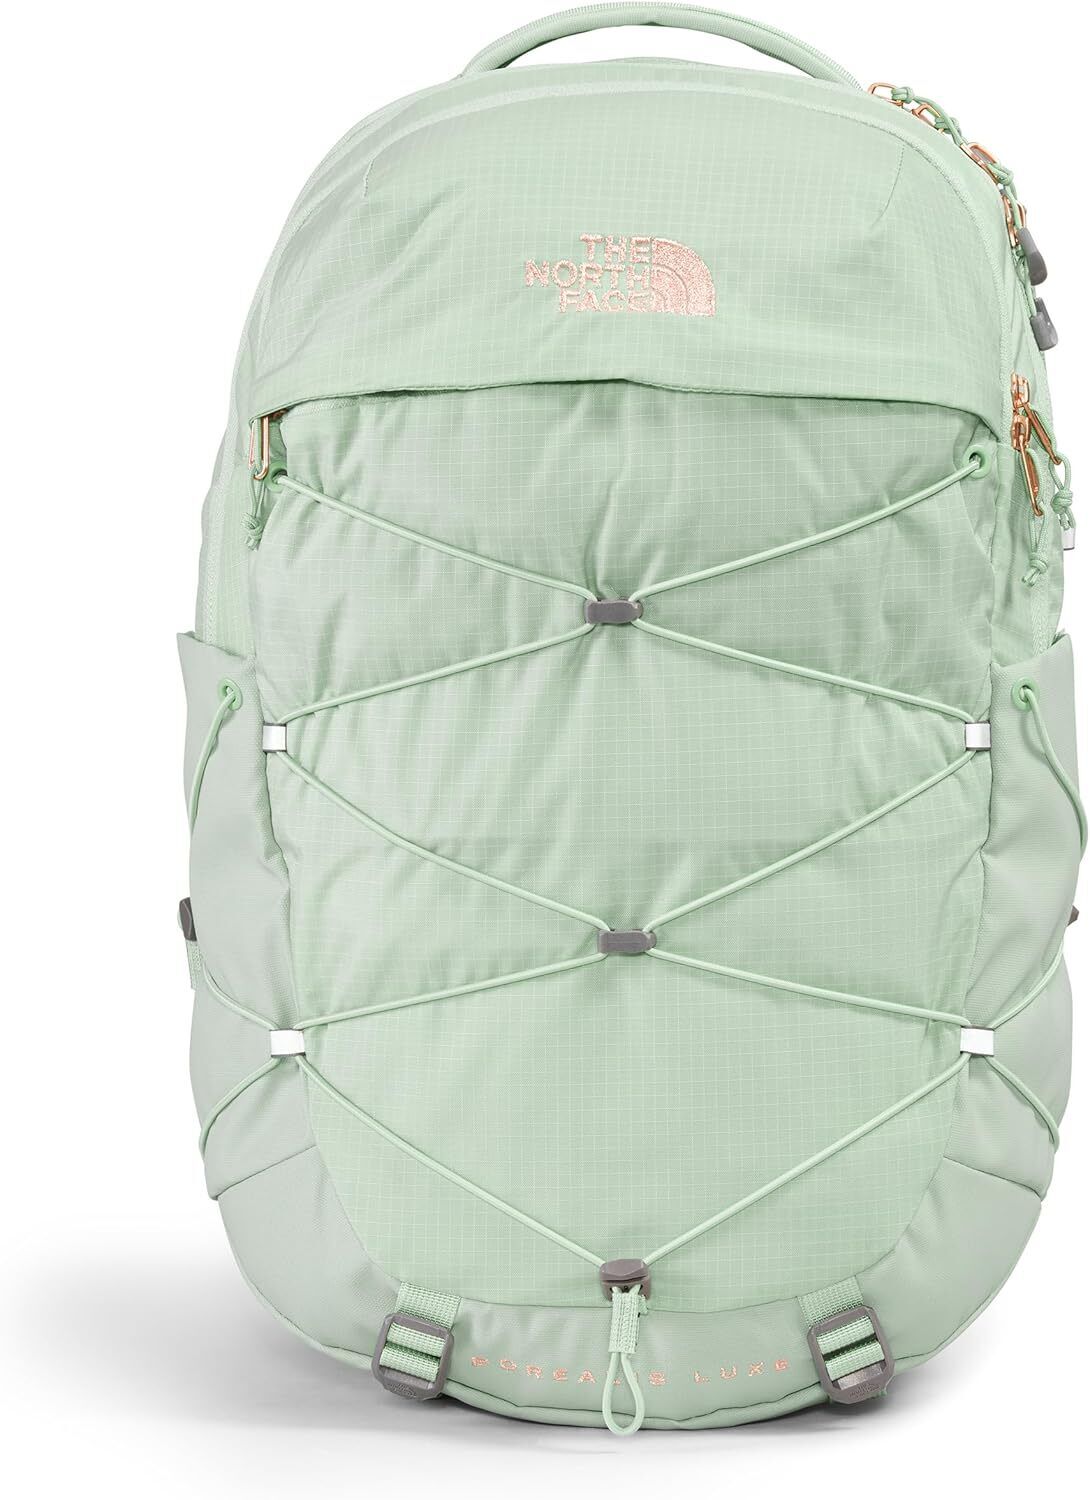 THE NORTH FACE Women's Borealis One Size, Misty Sage/Burnt Coral Metallic 